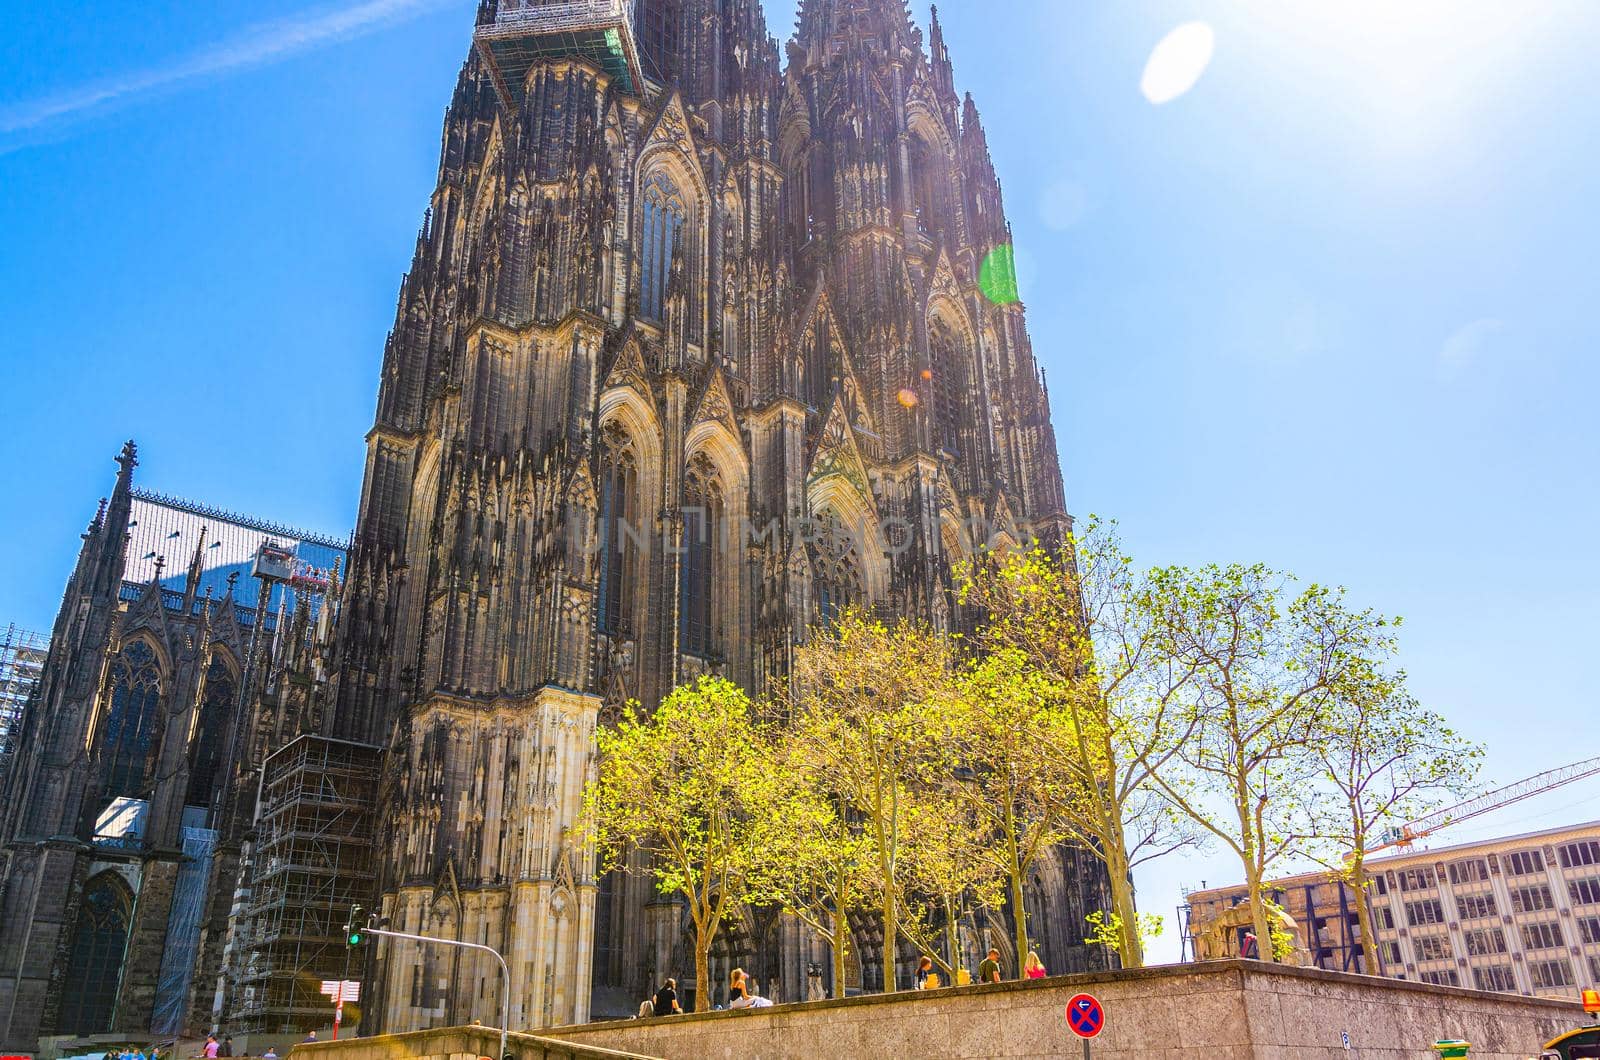 Cologne Cathedral Roman Catholic Church of Saint Peter gothic architectural style building with two huge spires in historical city centre, blue sky in sunny day, North Rhine-Westphalia, Germany